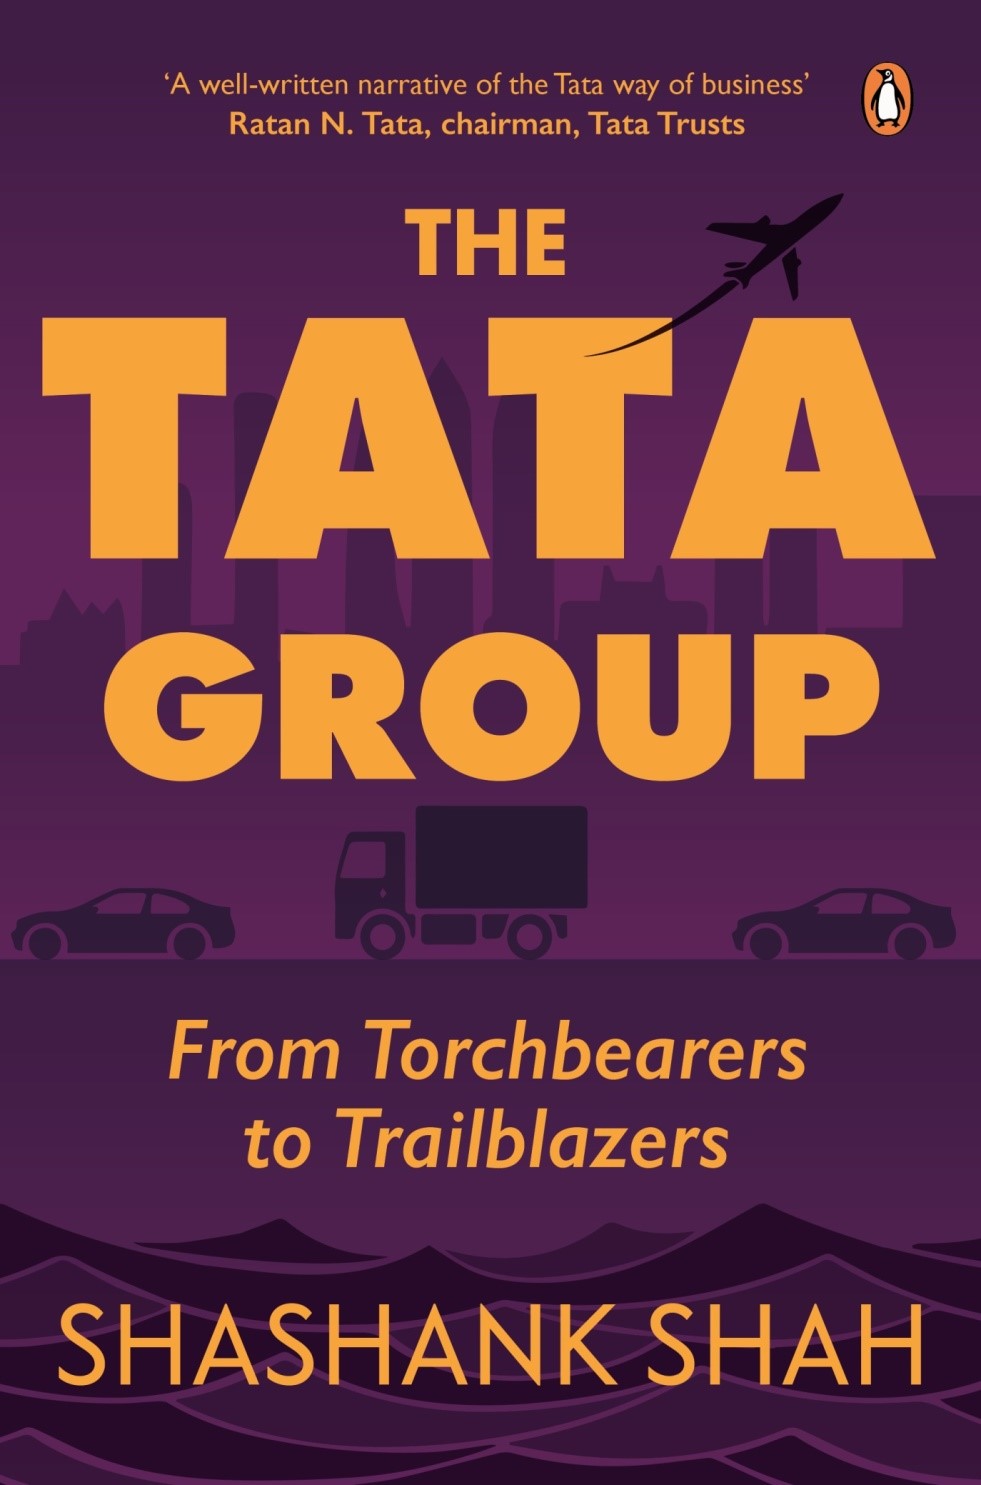 THE TATA GROUP COVER PAGE